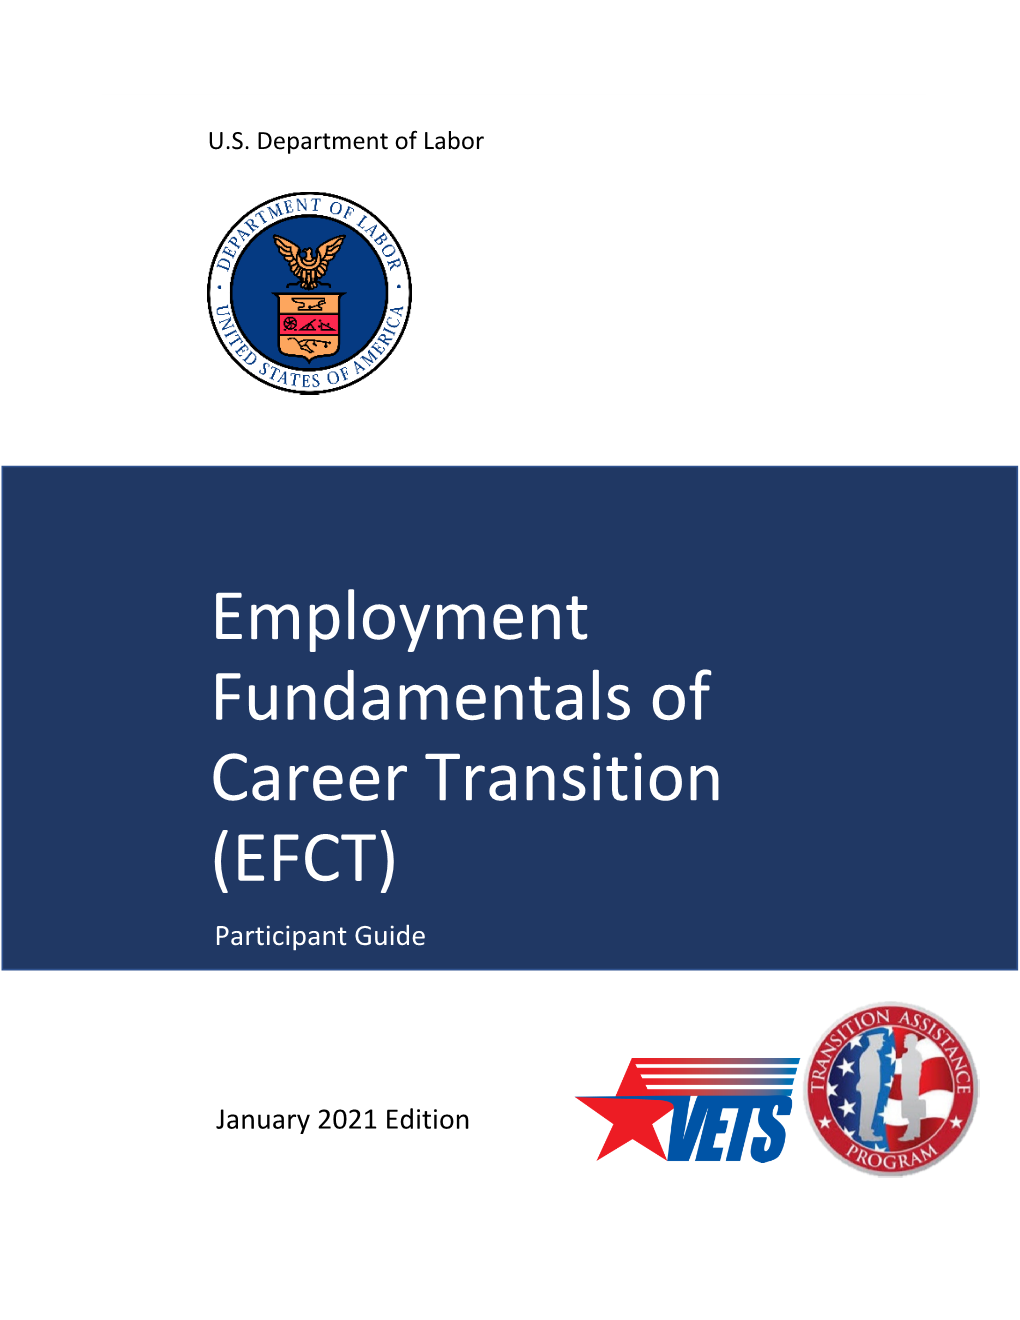 Employment Fundamentals of Career Transition (EFCT) Participant Guide